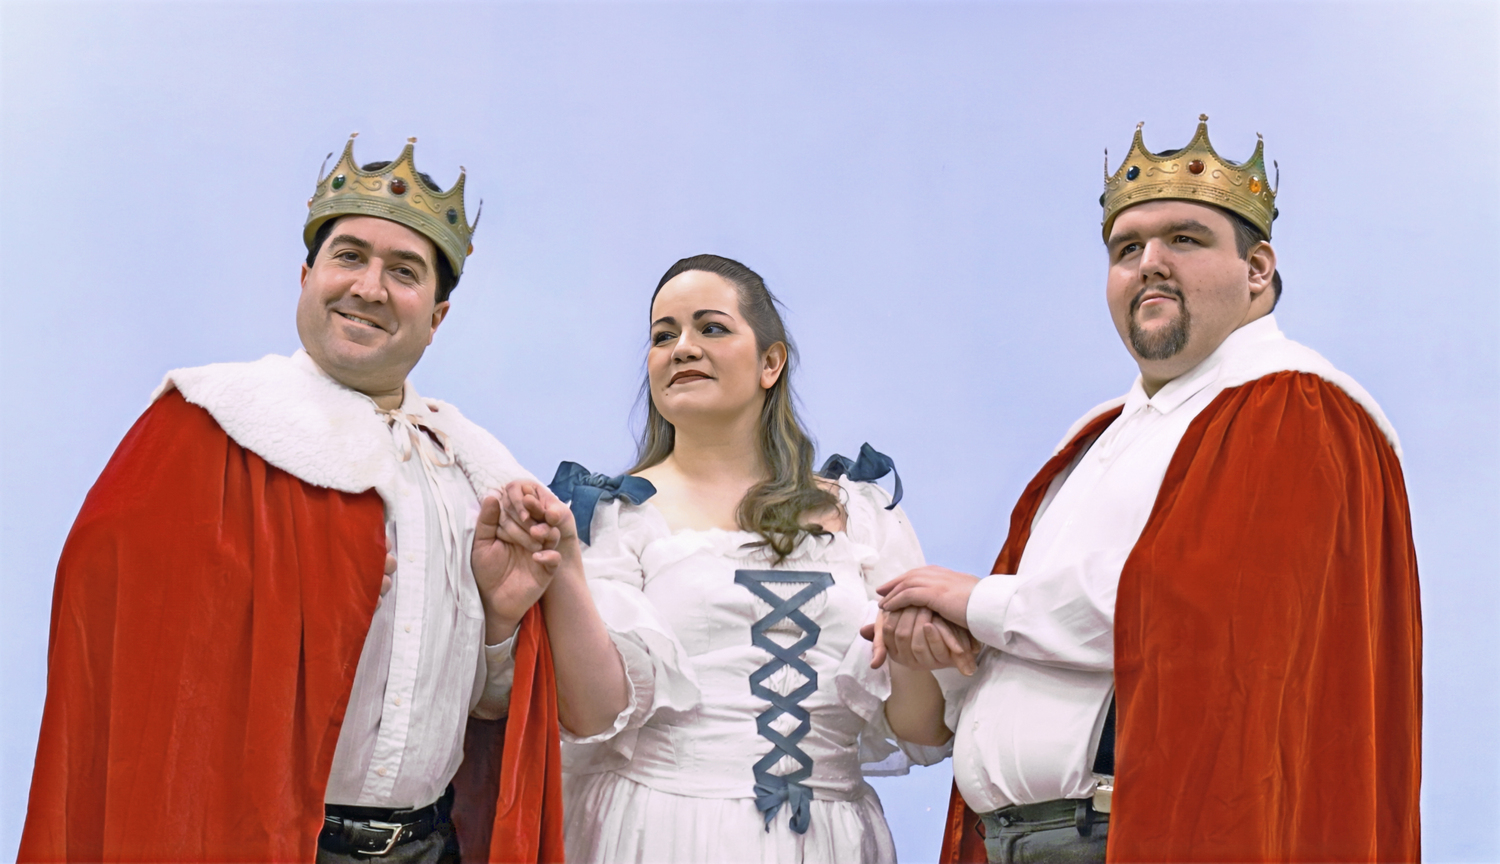 Phyllis (Kara Vertucci) with Lord Mountararat (Kenneth Kopolovicz, left) and Lord Tolloller (Richard Risi) in a scene from 